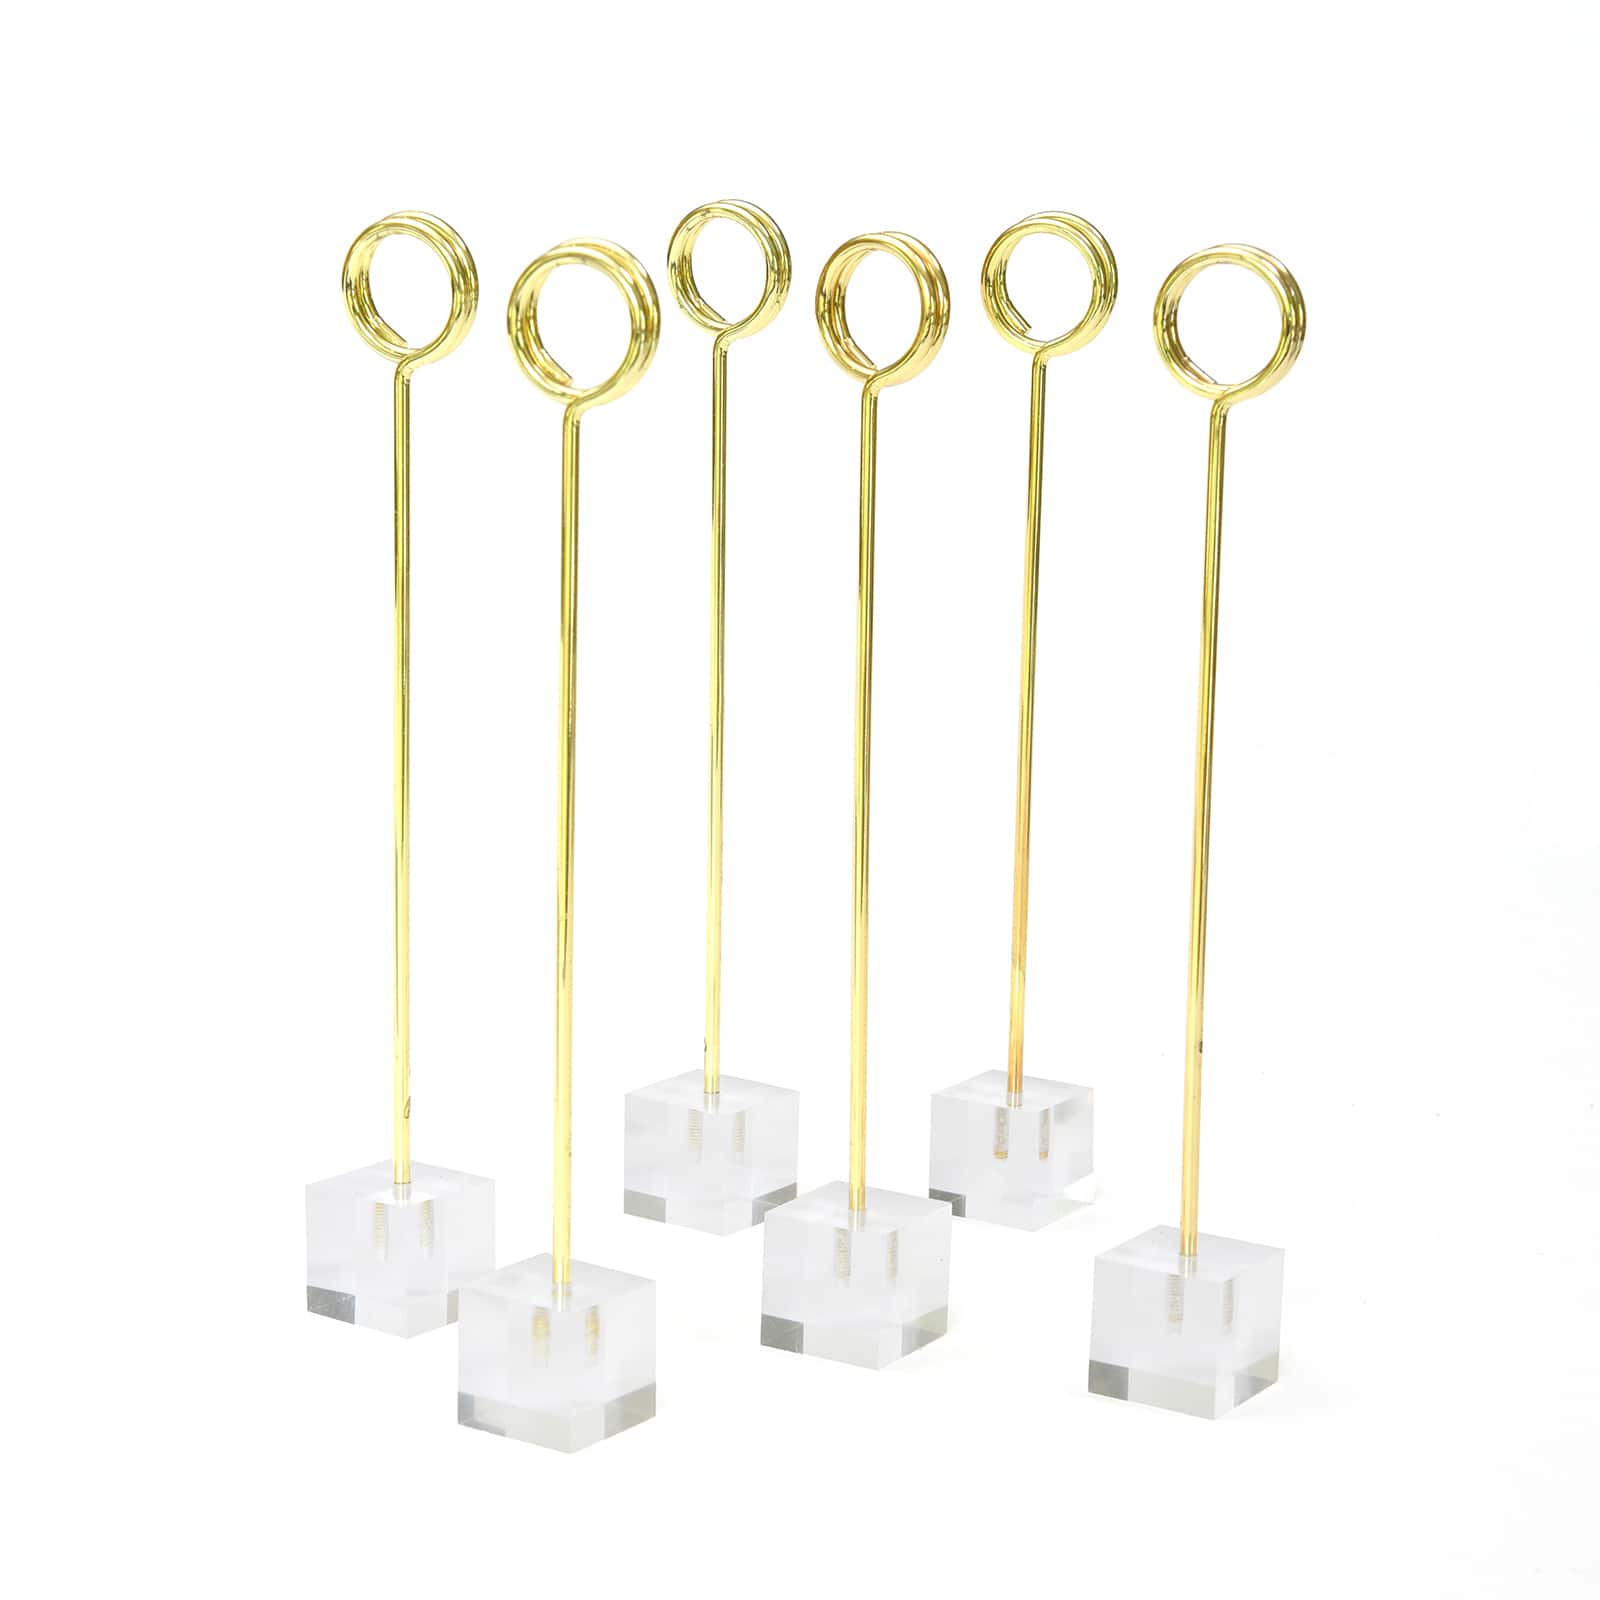 6 Packs: 12 ct. (72 total) Style Me Pretty Clear Table Number Stands